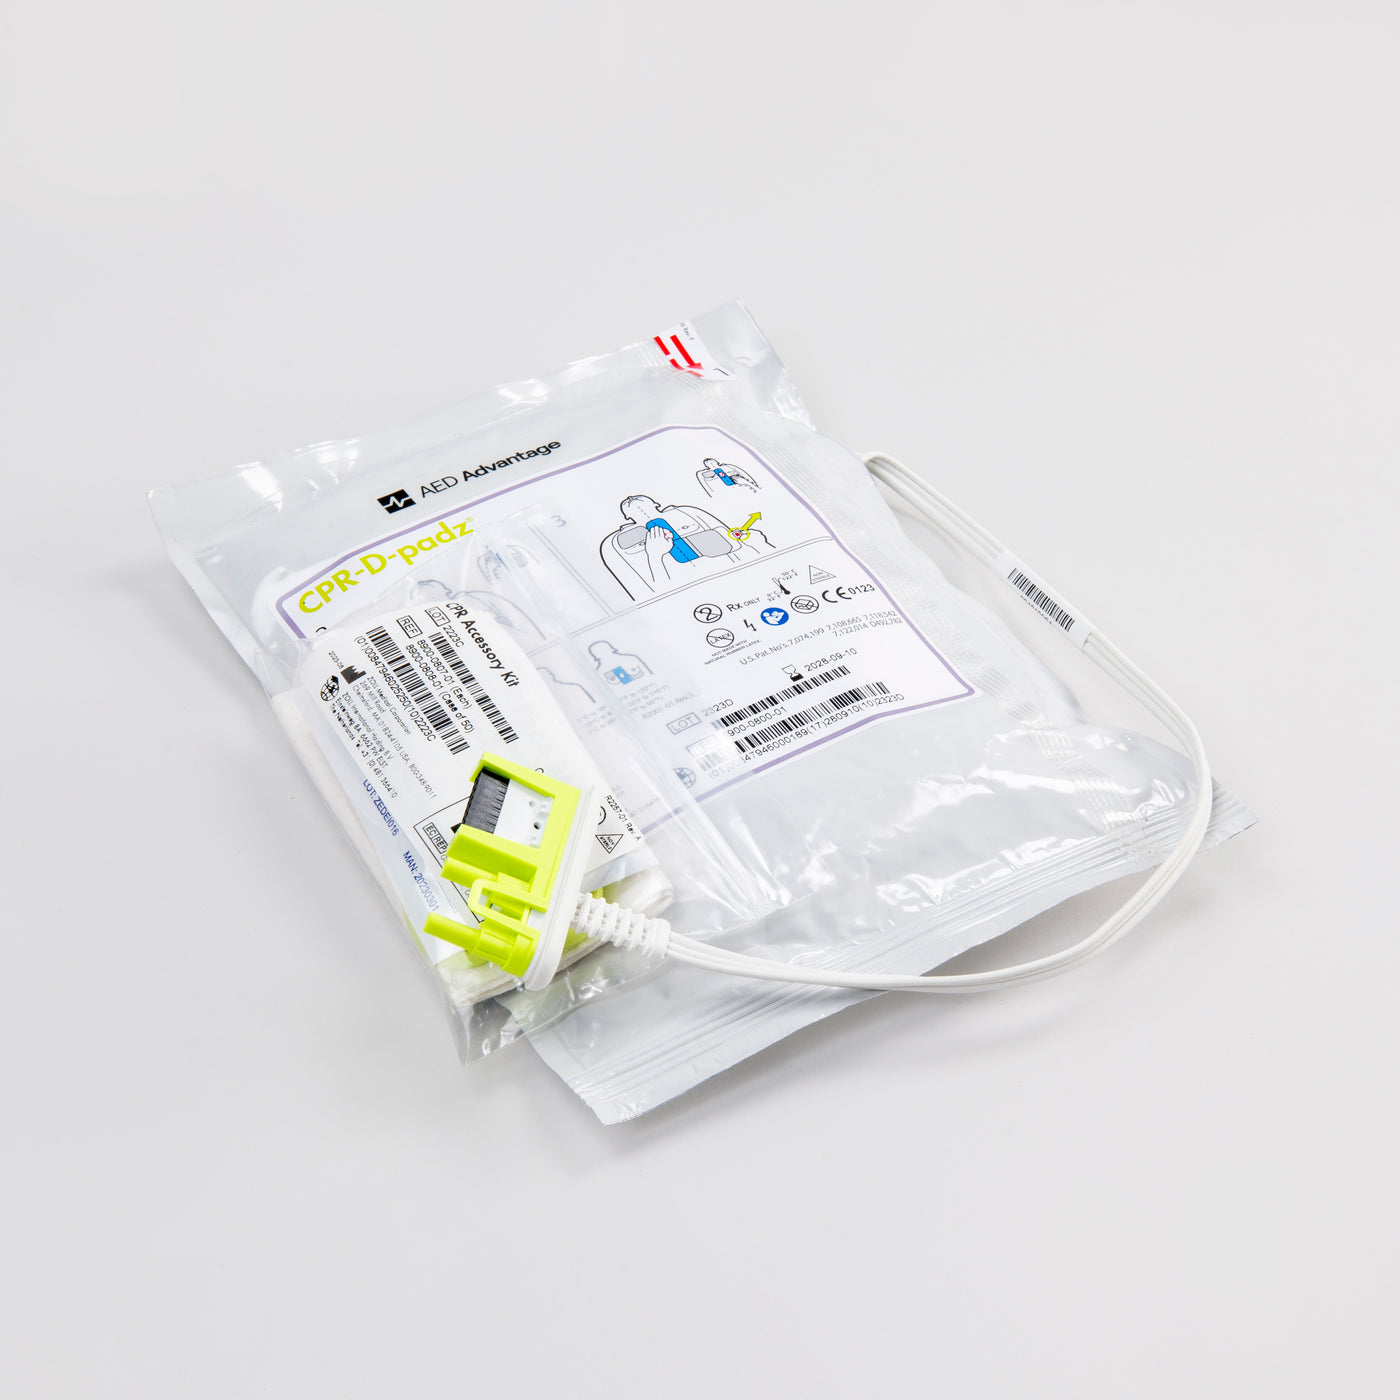 ZOLL AED Plus adult electrodes encased in a white foil package with a white connector cord